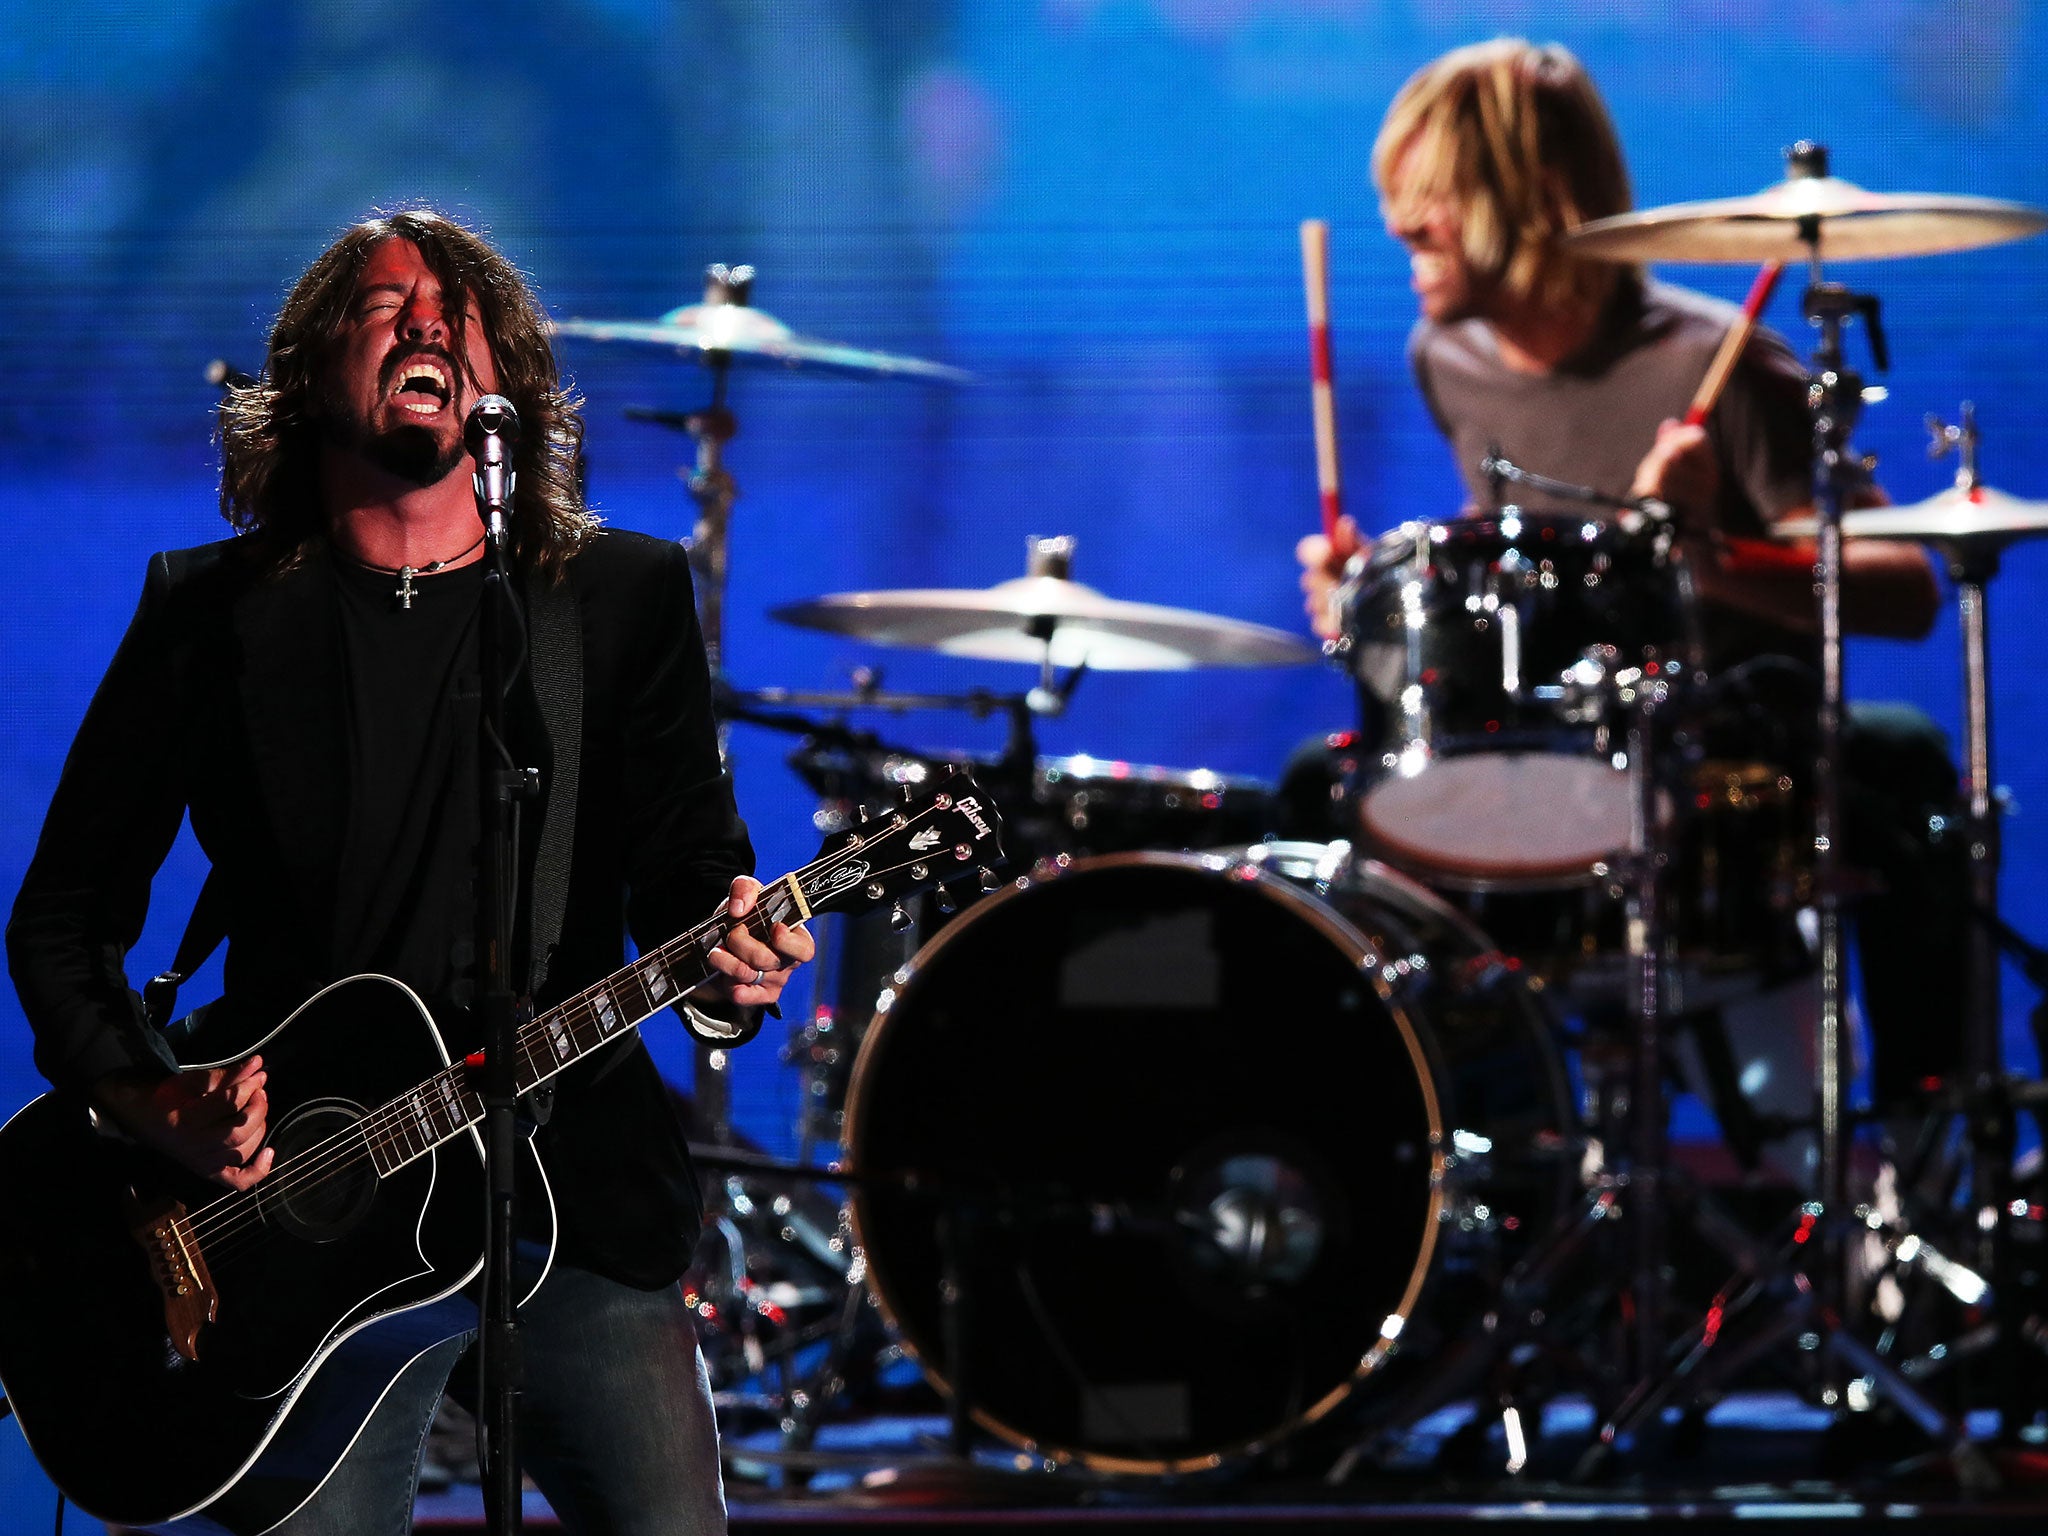 Foo Fighters frontman Dave Grohl has been ordered to cancel gigs by doctors after breaking his leg